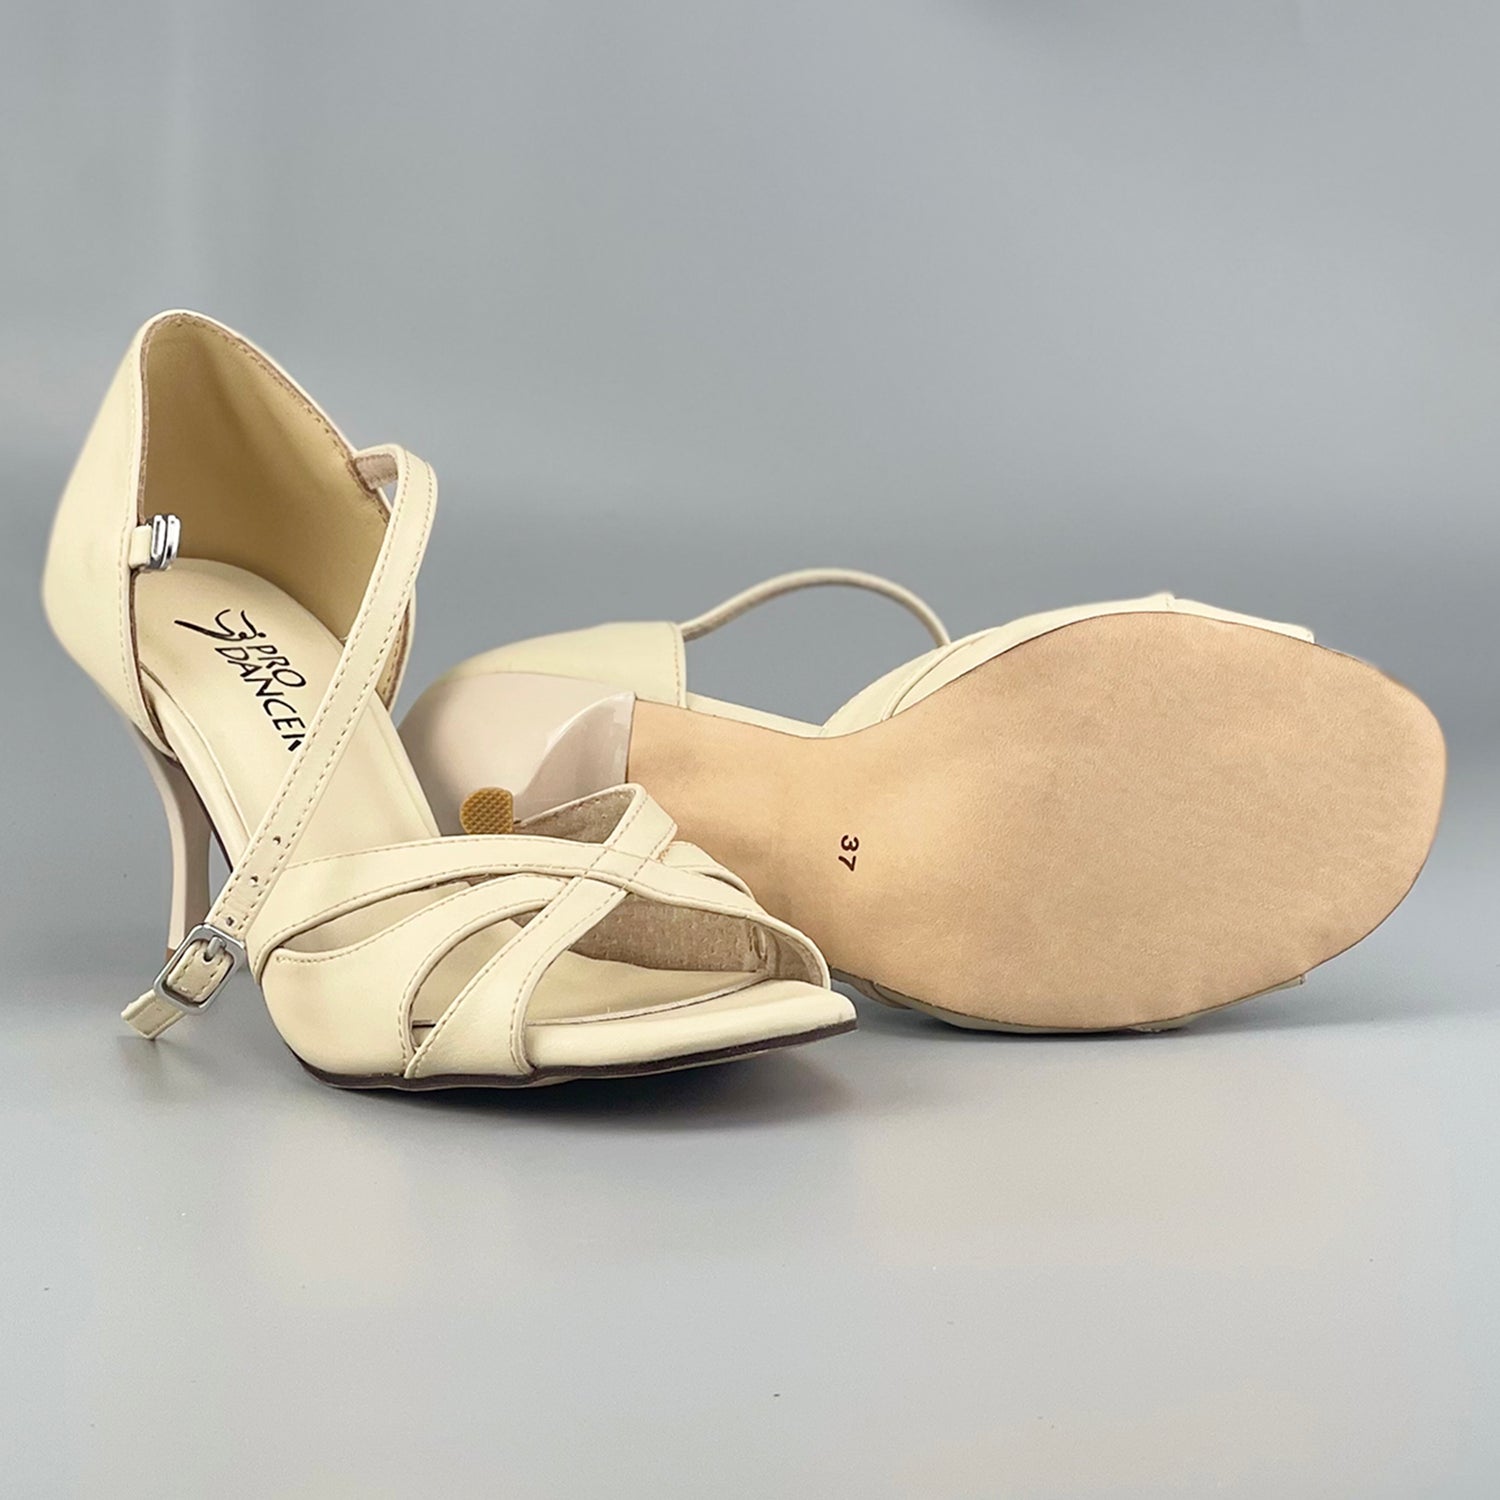 Pro Dancer Tango Argentino Shoes high heel dance sandals with leather sole in beige color (PD-9061A)5